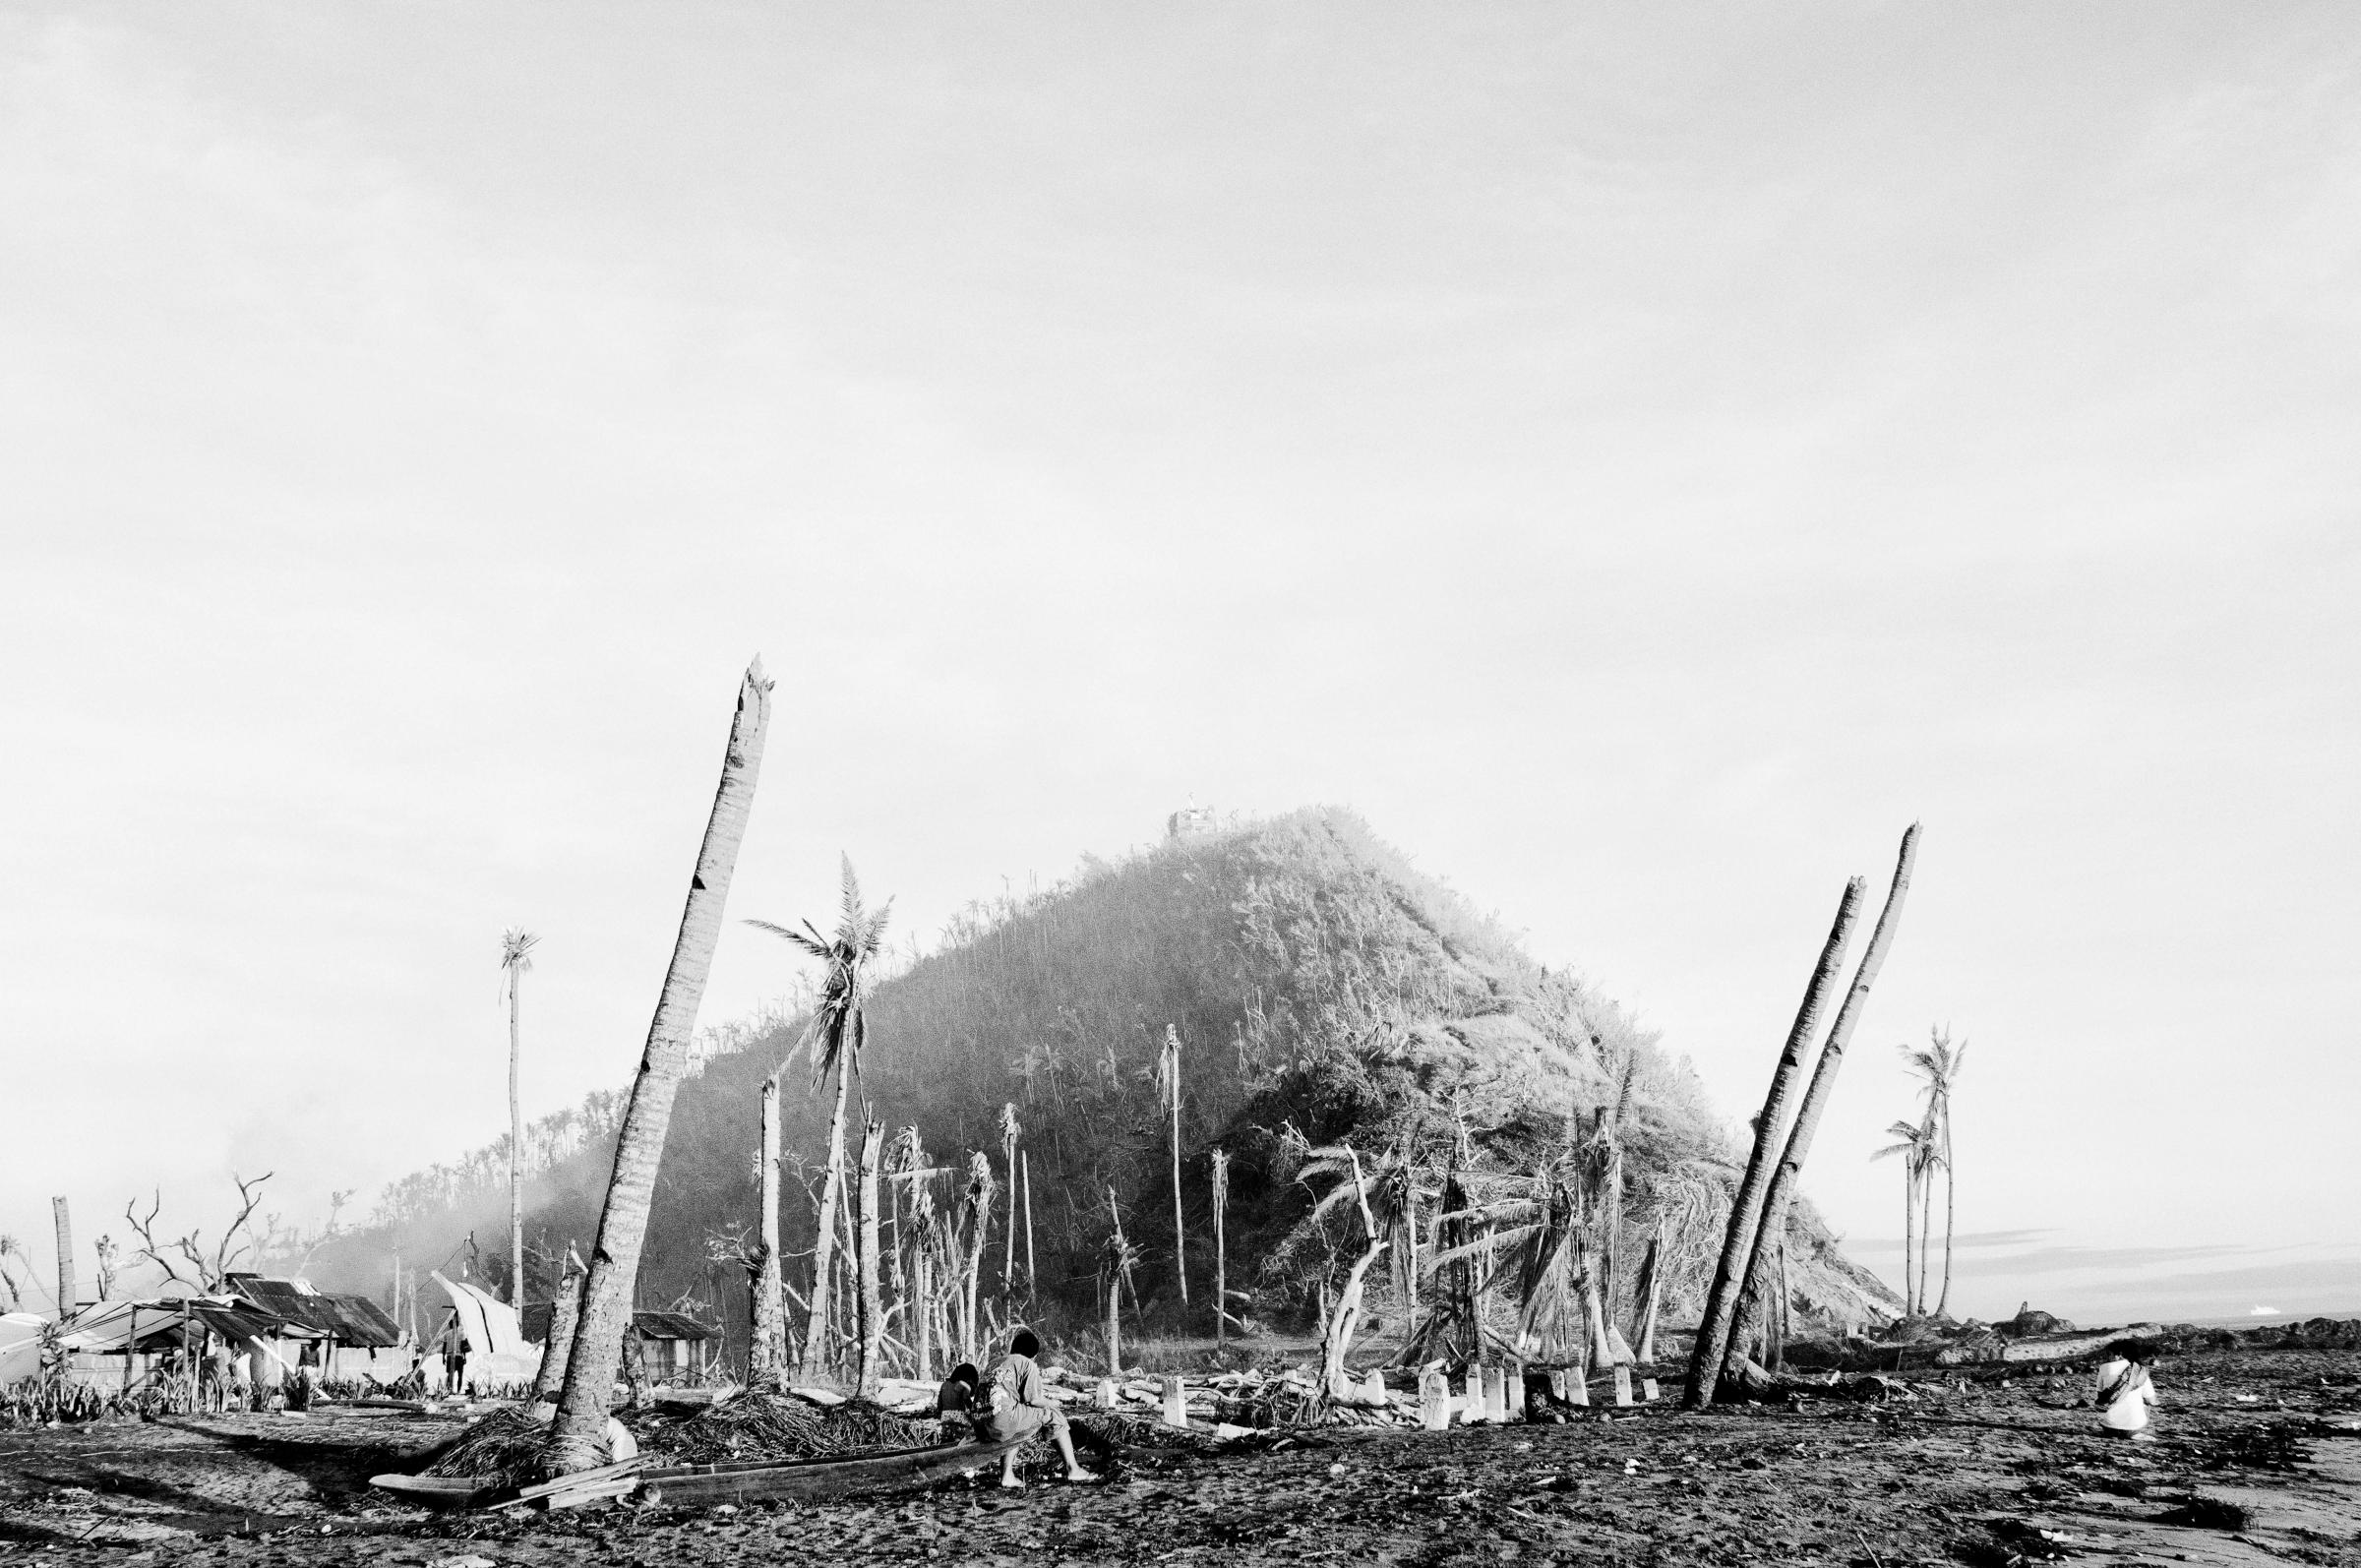 The coast of Tanauan in Leyte, Philippines, on Dec. 10, 2013 after Typhoon Haiyan, known locally as Typhoon Yolanda, struck the area.